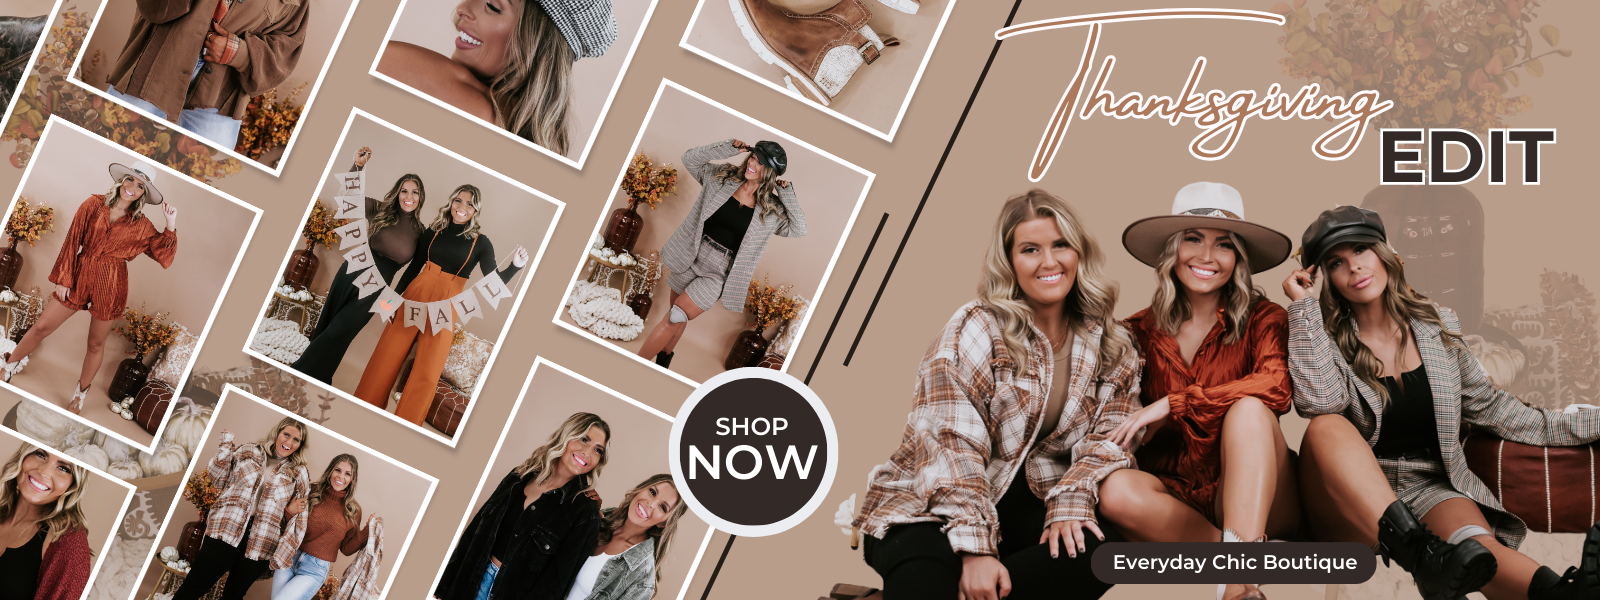 Embrace the Harvest Season with Thanksgiving Fashion from Everyday Chic Boutique